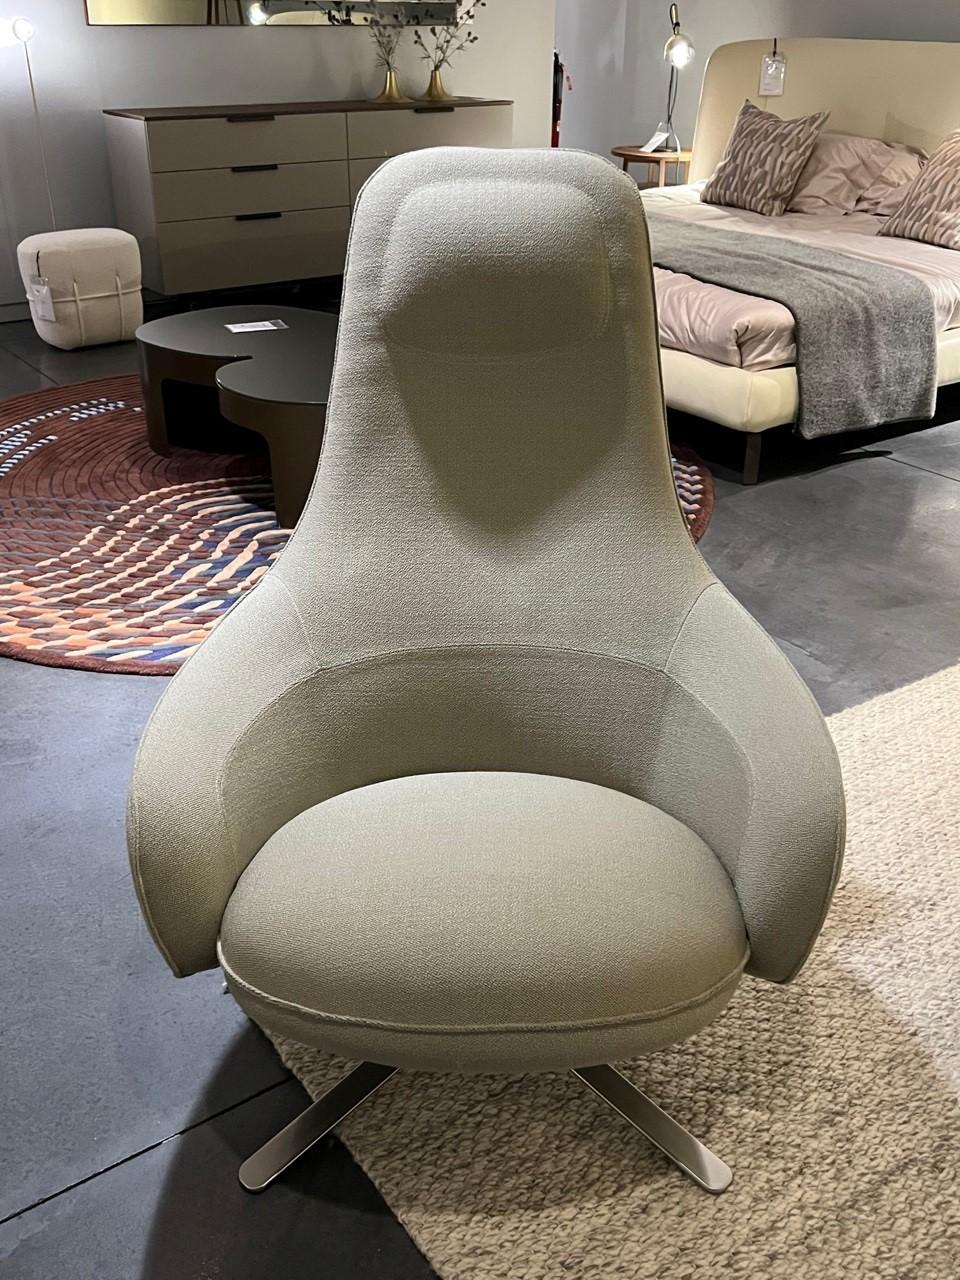 Moa Swivelling Recliner Chair with Ottoman in Vidar Mastic by Keiji Takeuchi In New Condition For Sale In New York, NY